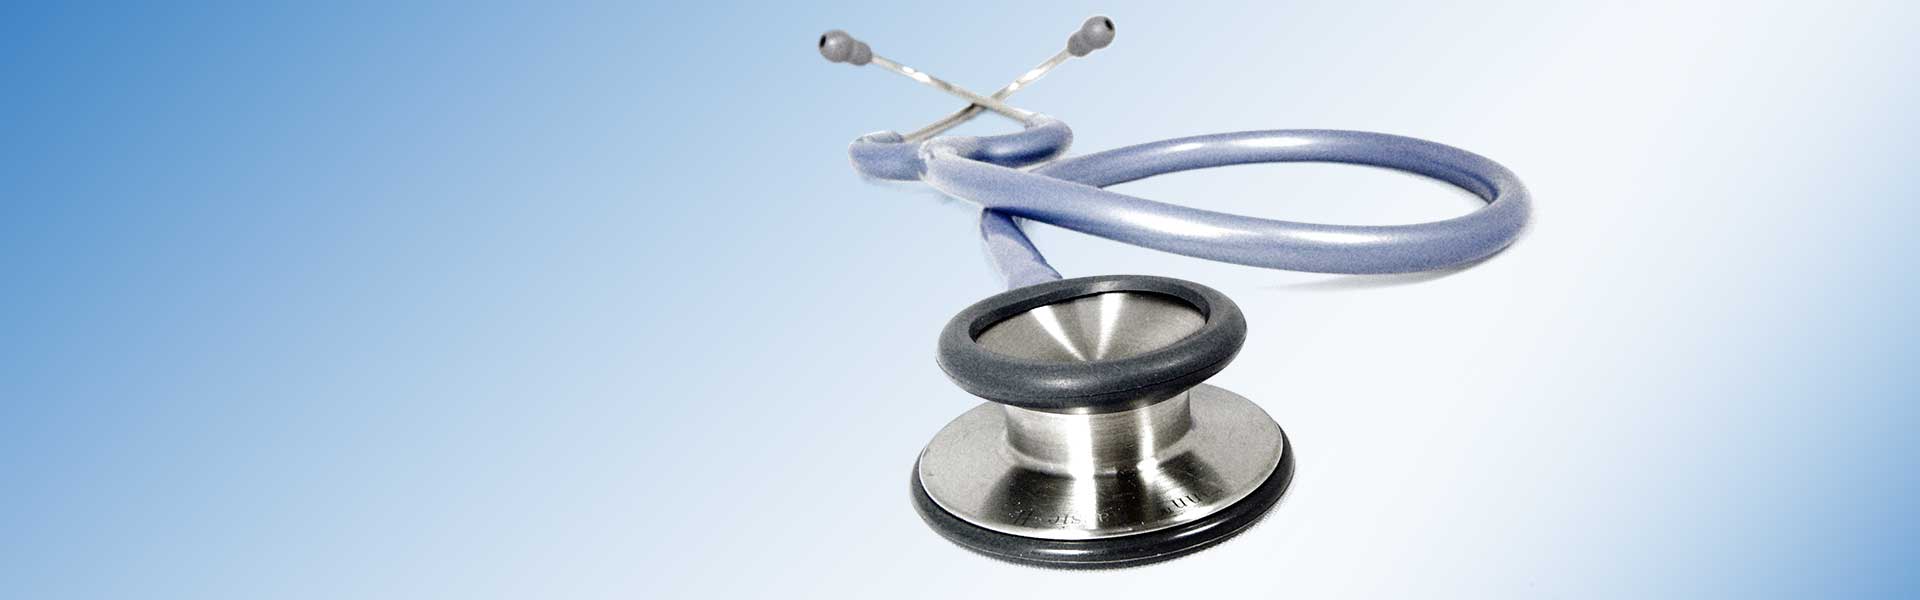 A GP's stethoscope on an NHS blue background